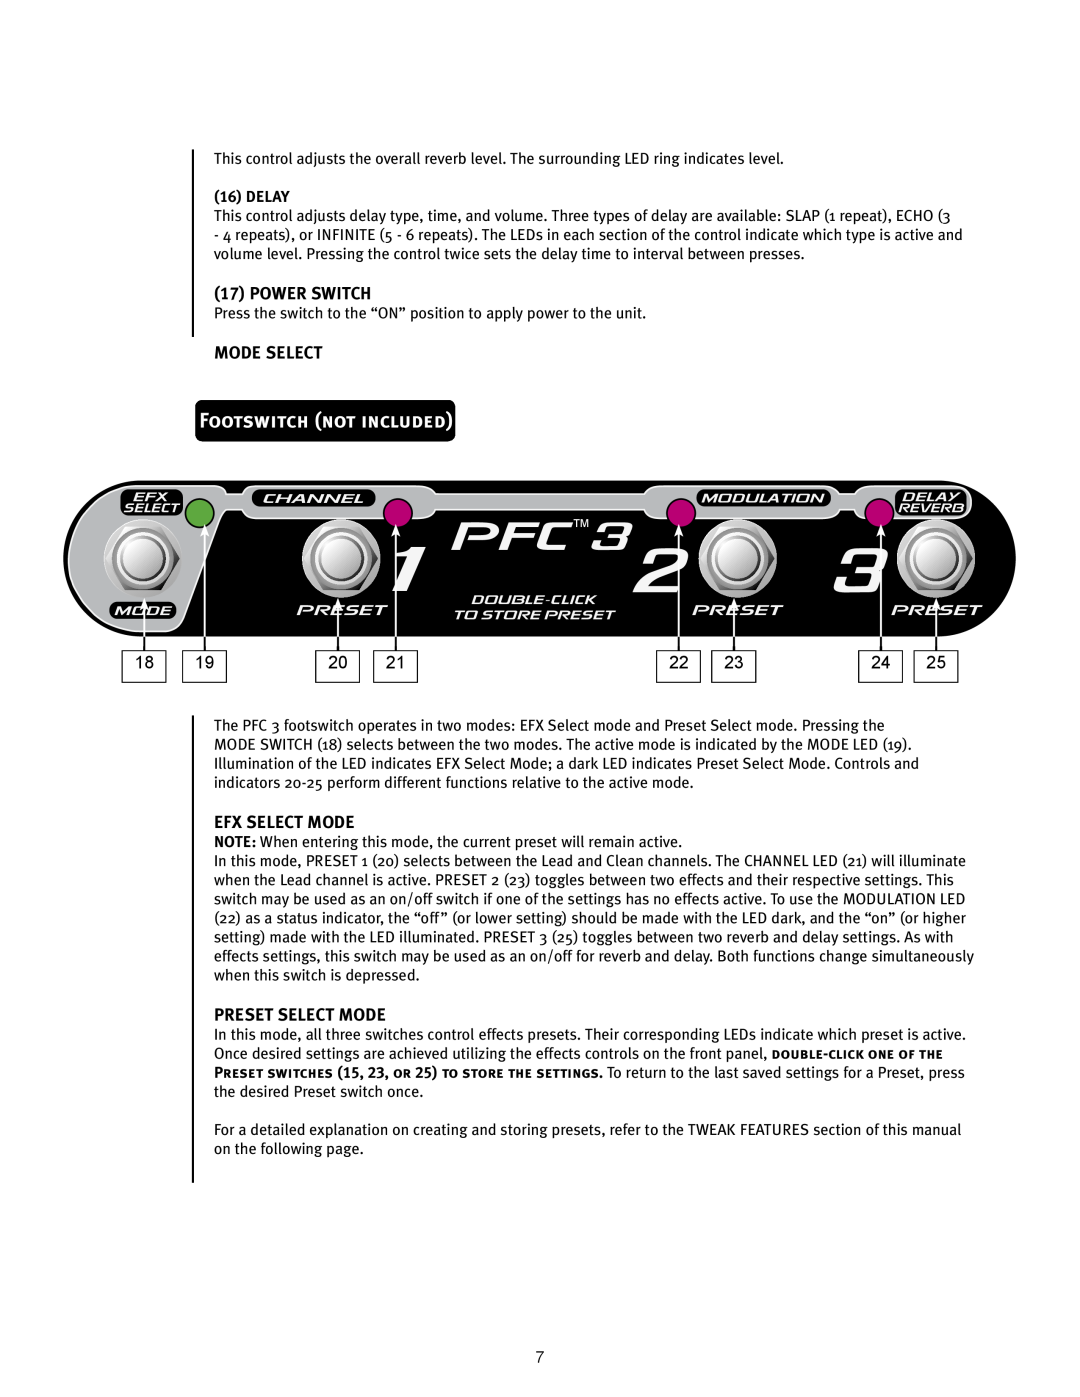 Peavey 110 EFX PFCTM3, Footswitch not included, Power Switch, Mode Select, Efx Select Mode, Preset Select Mode, Delay 